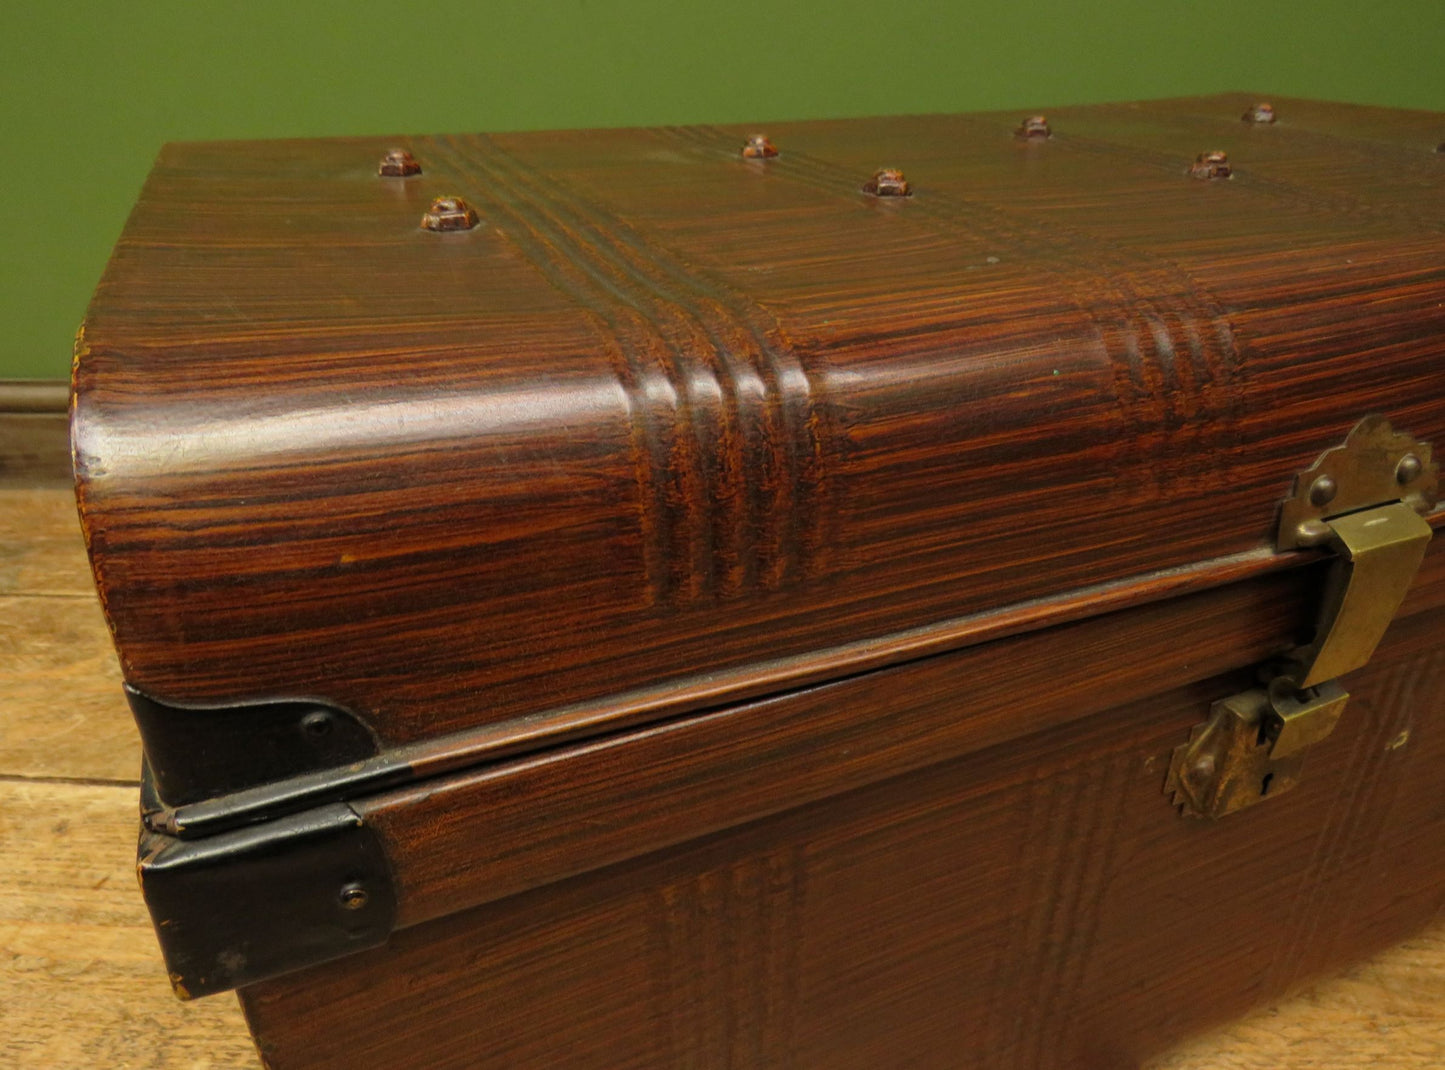 Metal Storage Trunk with Wood Grain finish